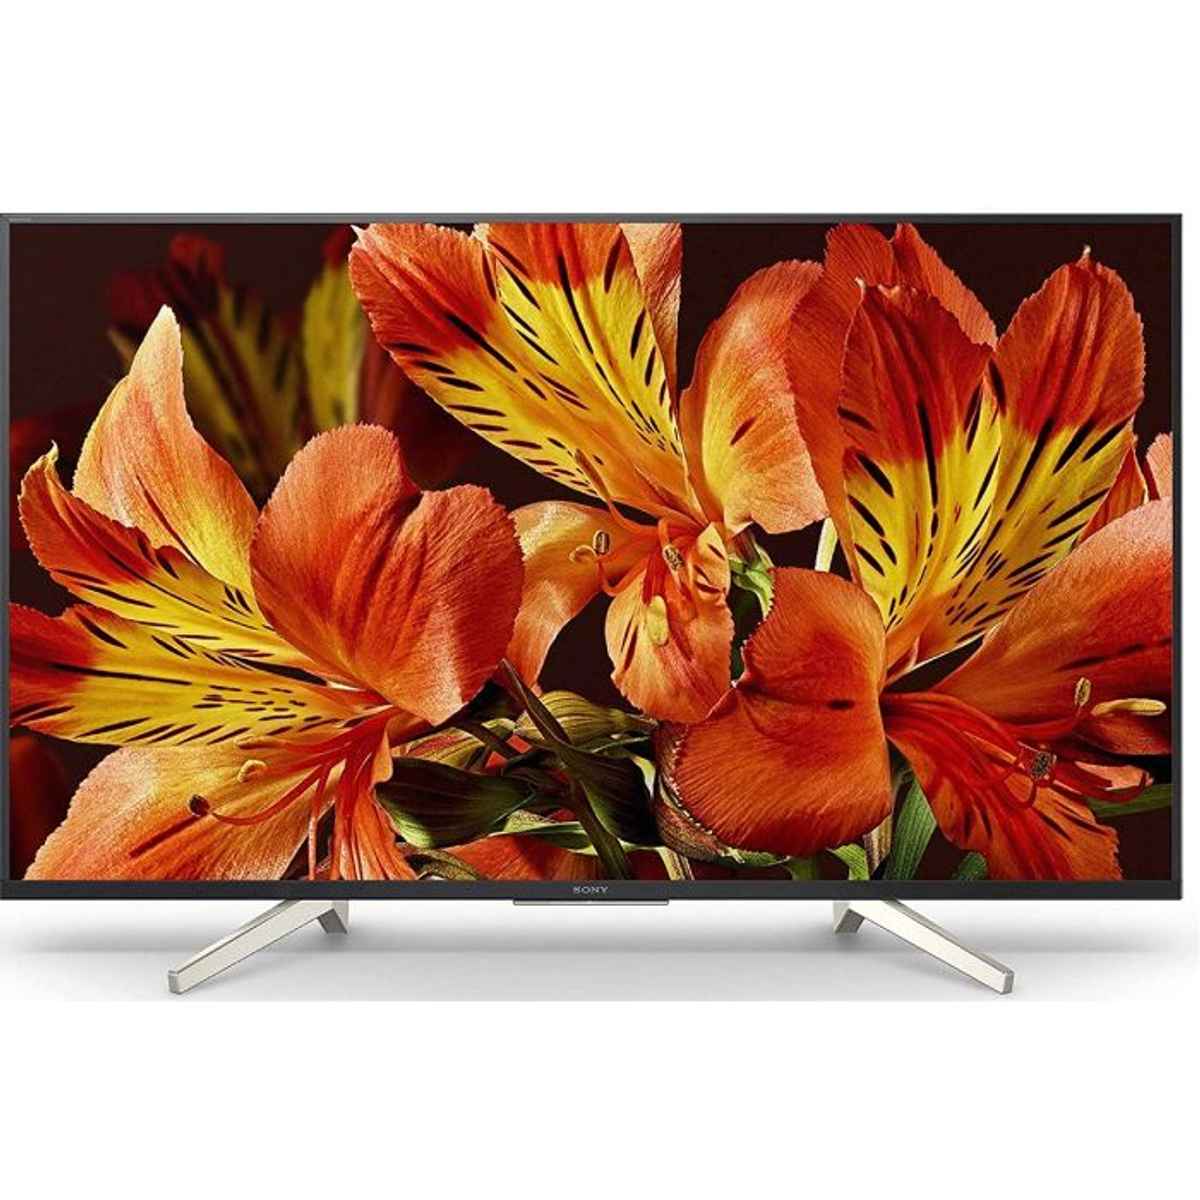 Sony Bravia 43 Inches 4K Ultra HD Android LED TV (KD-43X8500F)